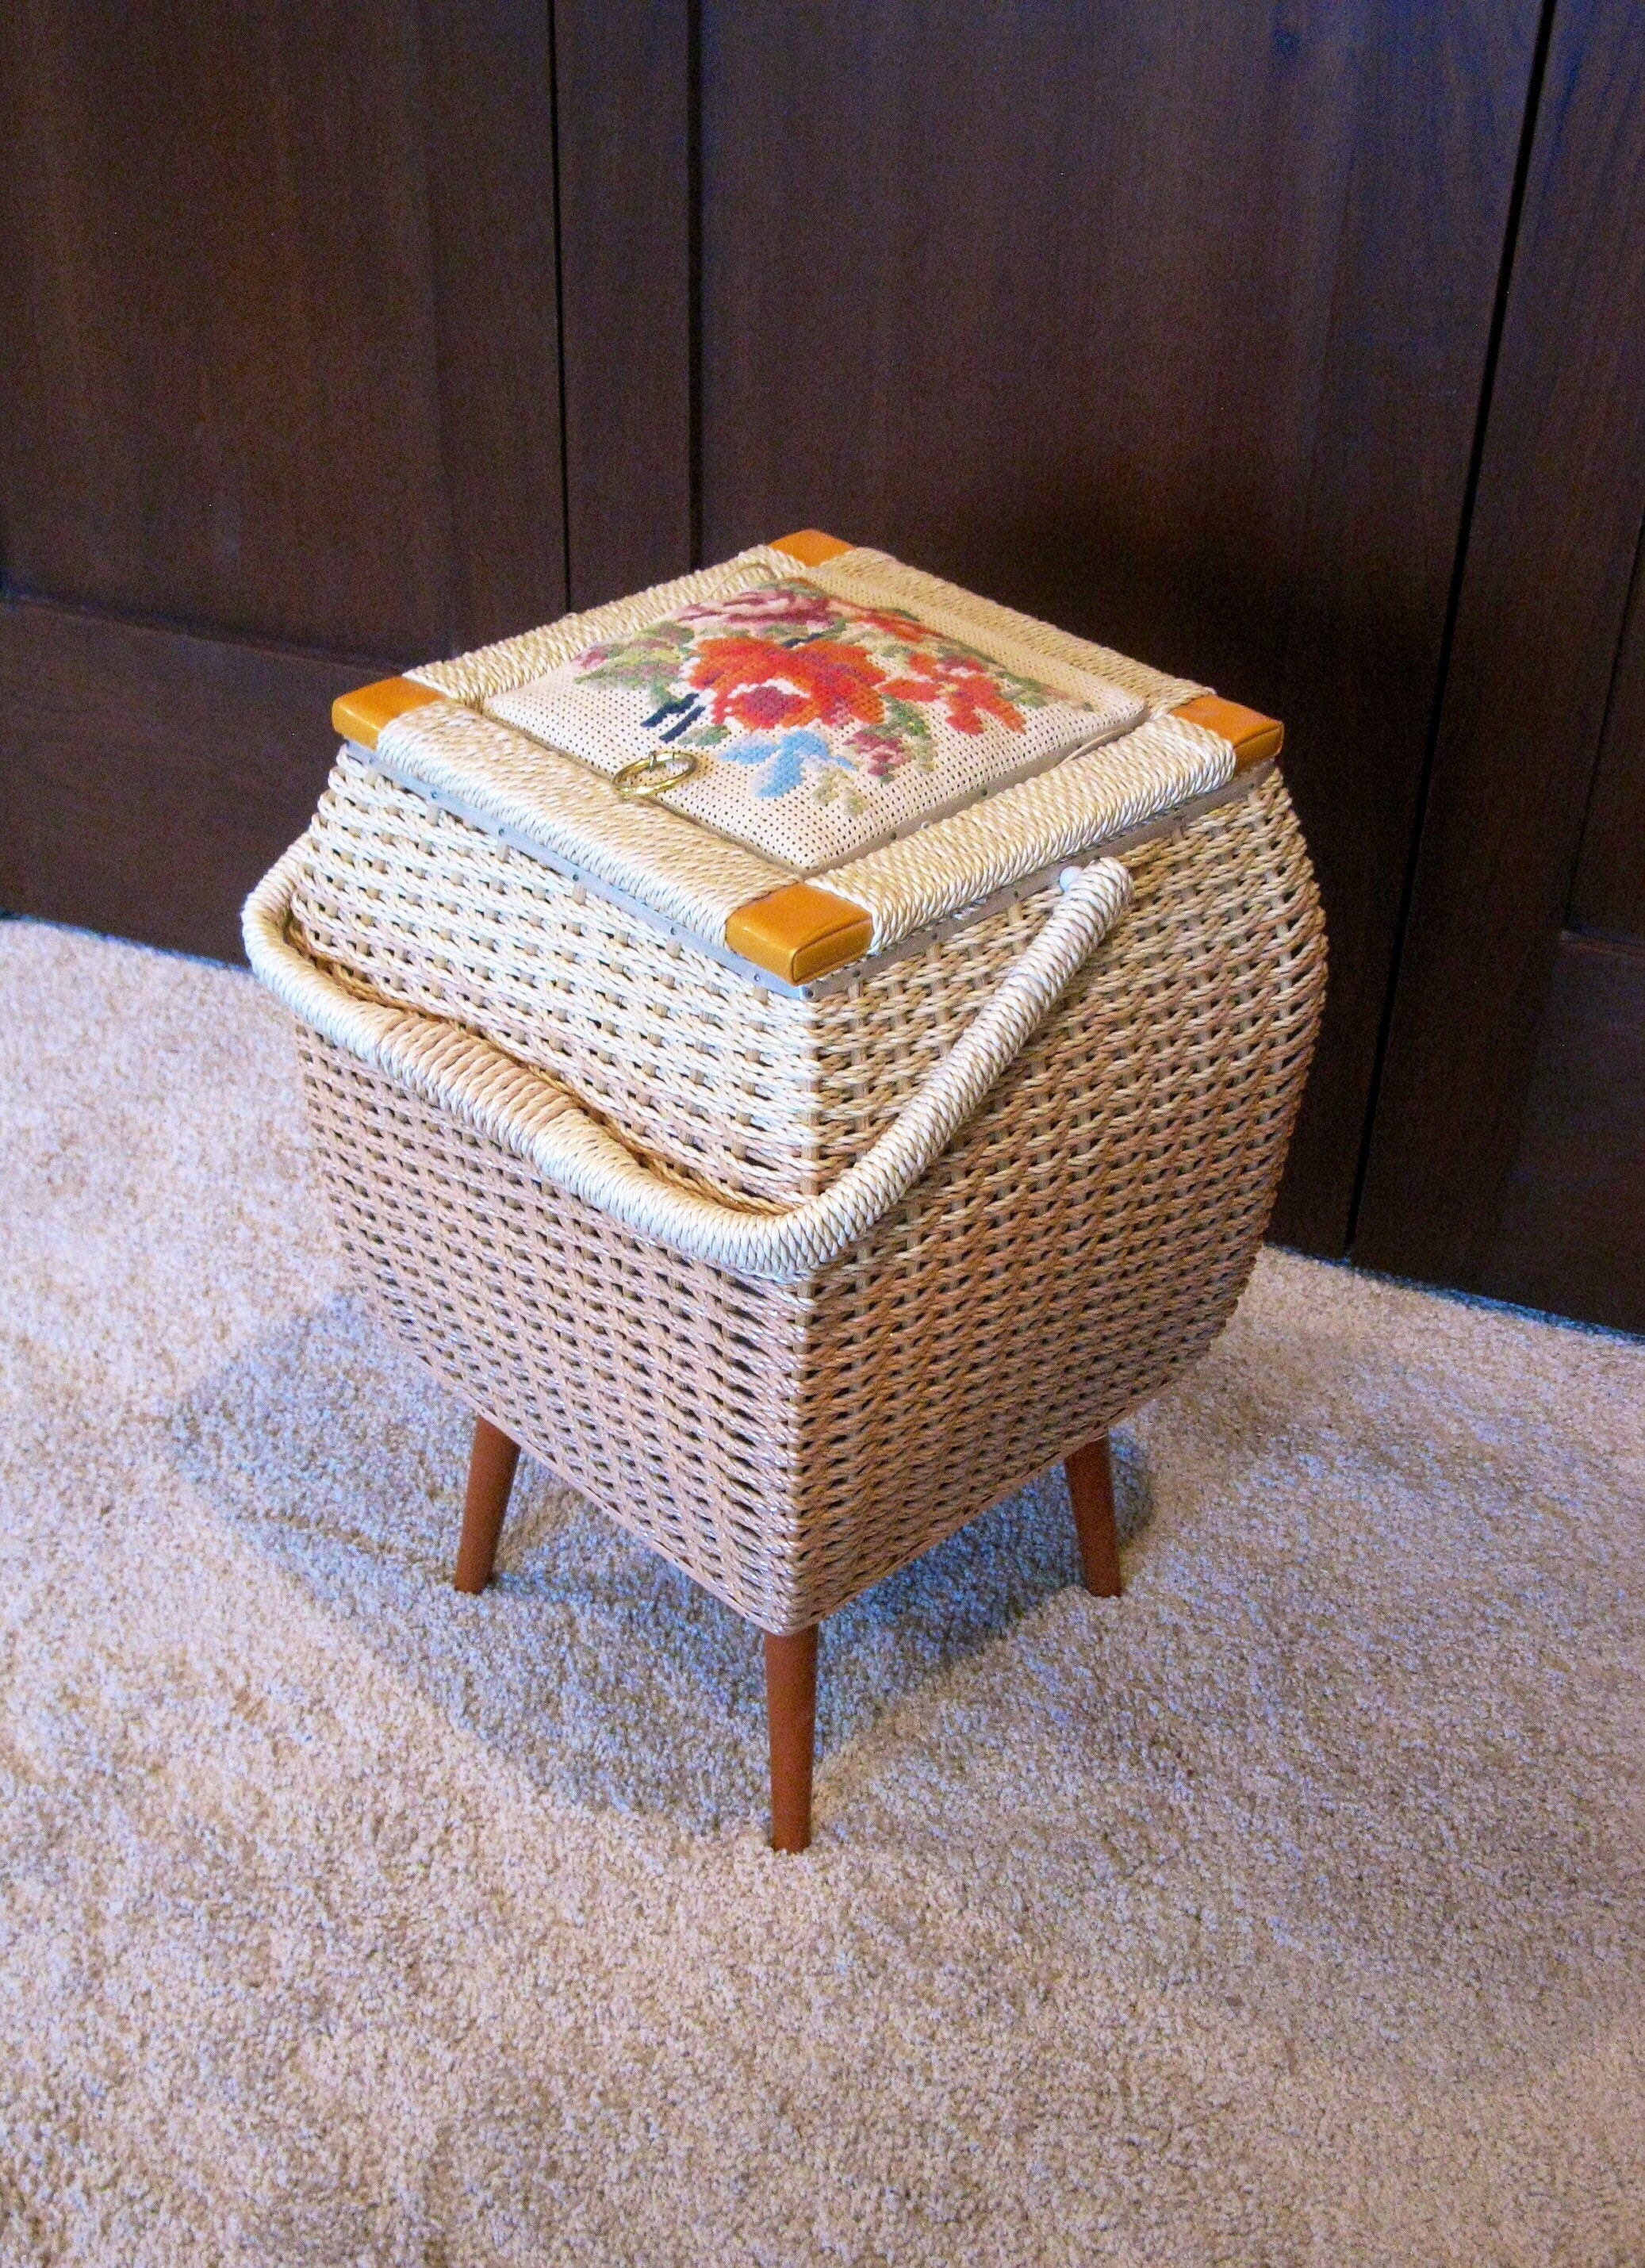 Our Dritz Oval Sewing Basket, XL Sewing Baskets & Storage are of good  quality, low price, high quality and quantity